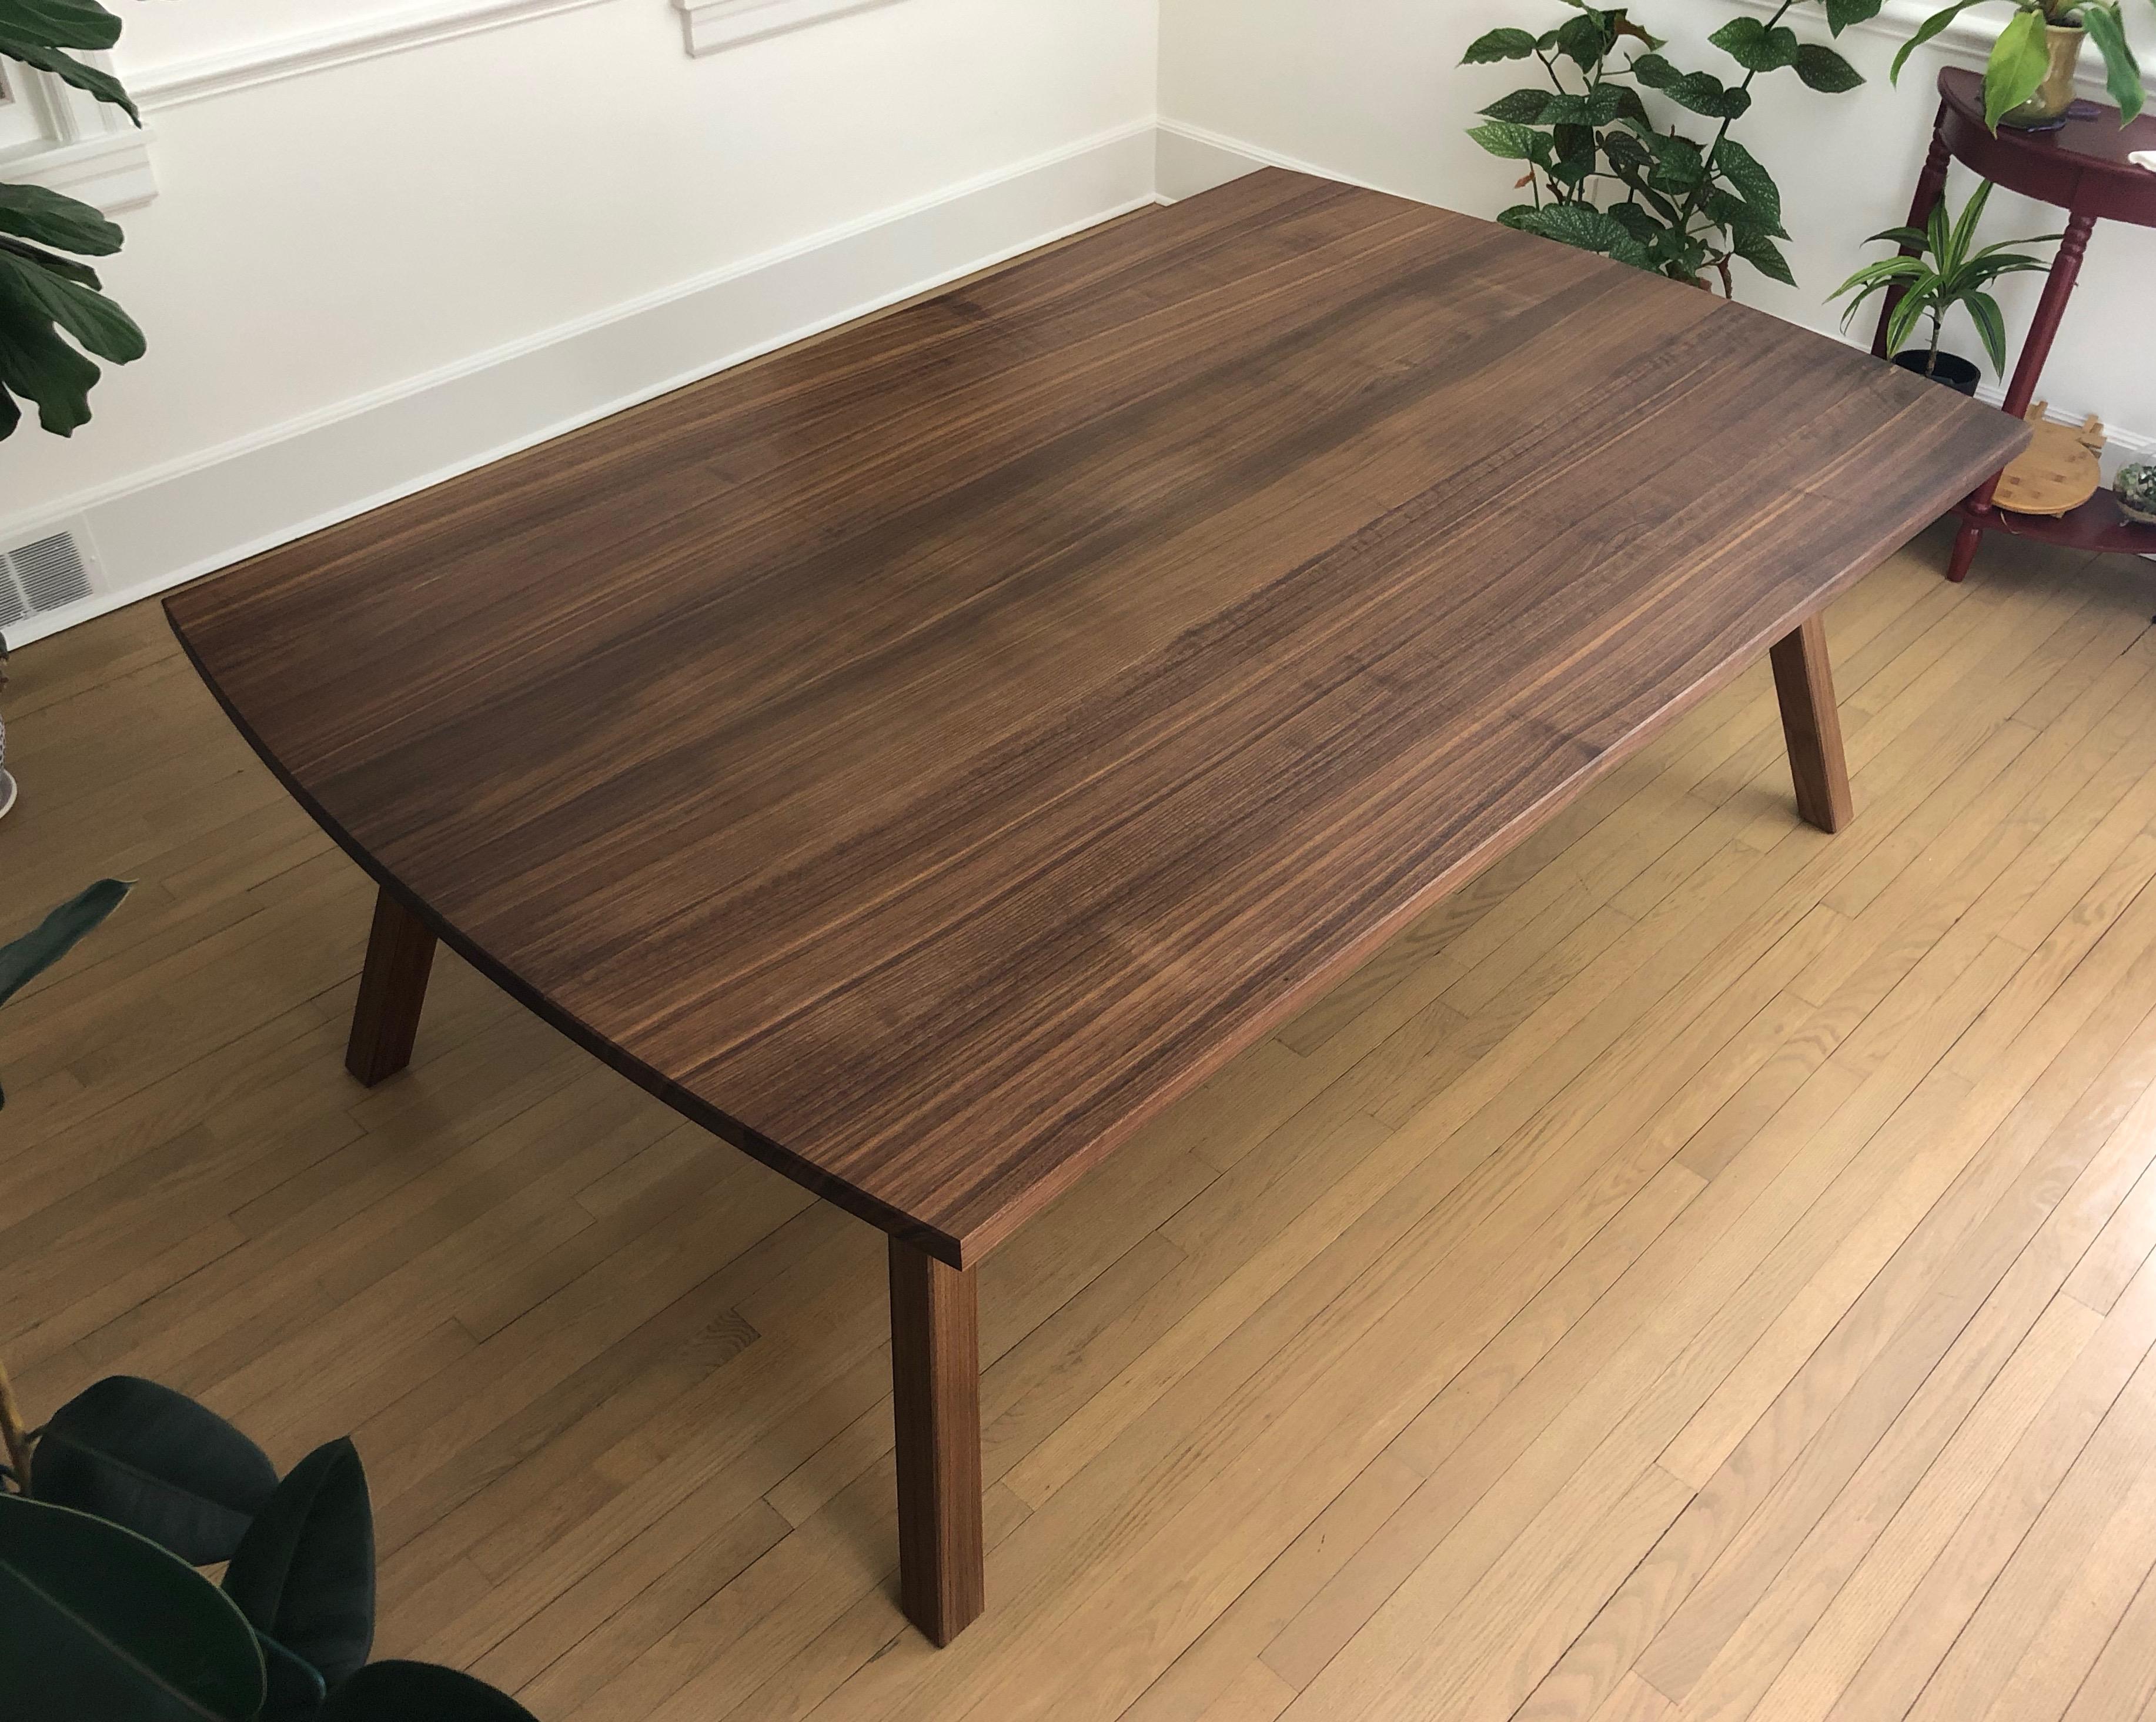 Splayed Leg Dining Table in Quartersawn Walnut In New Condition For Sale In Princeton, NJ